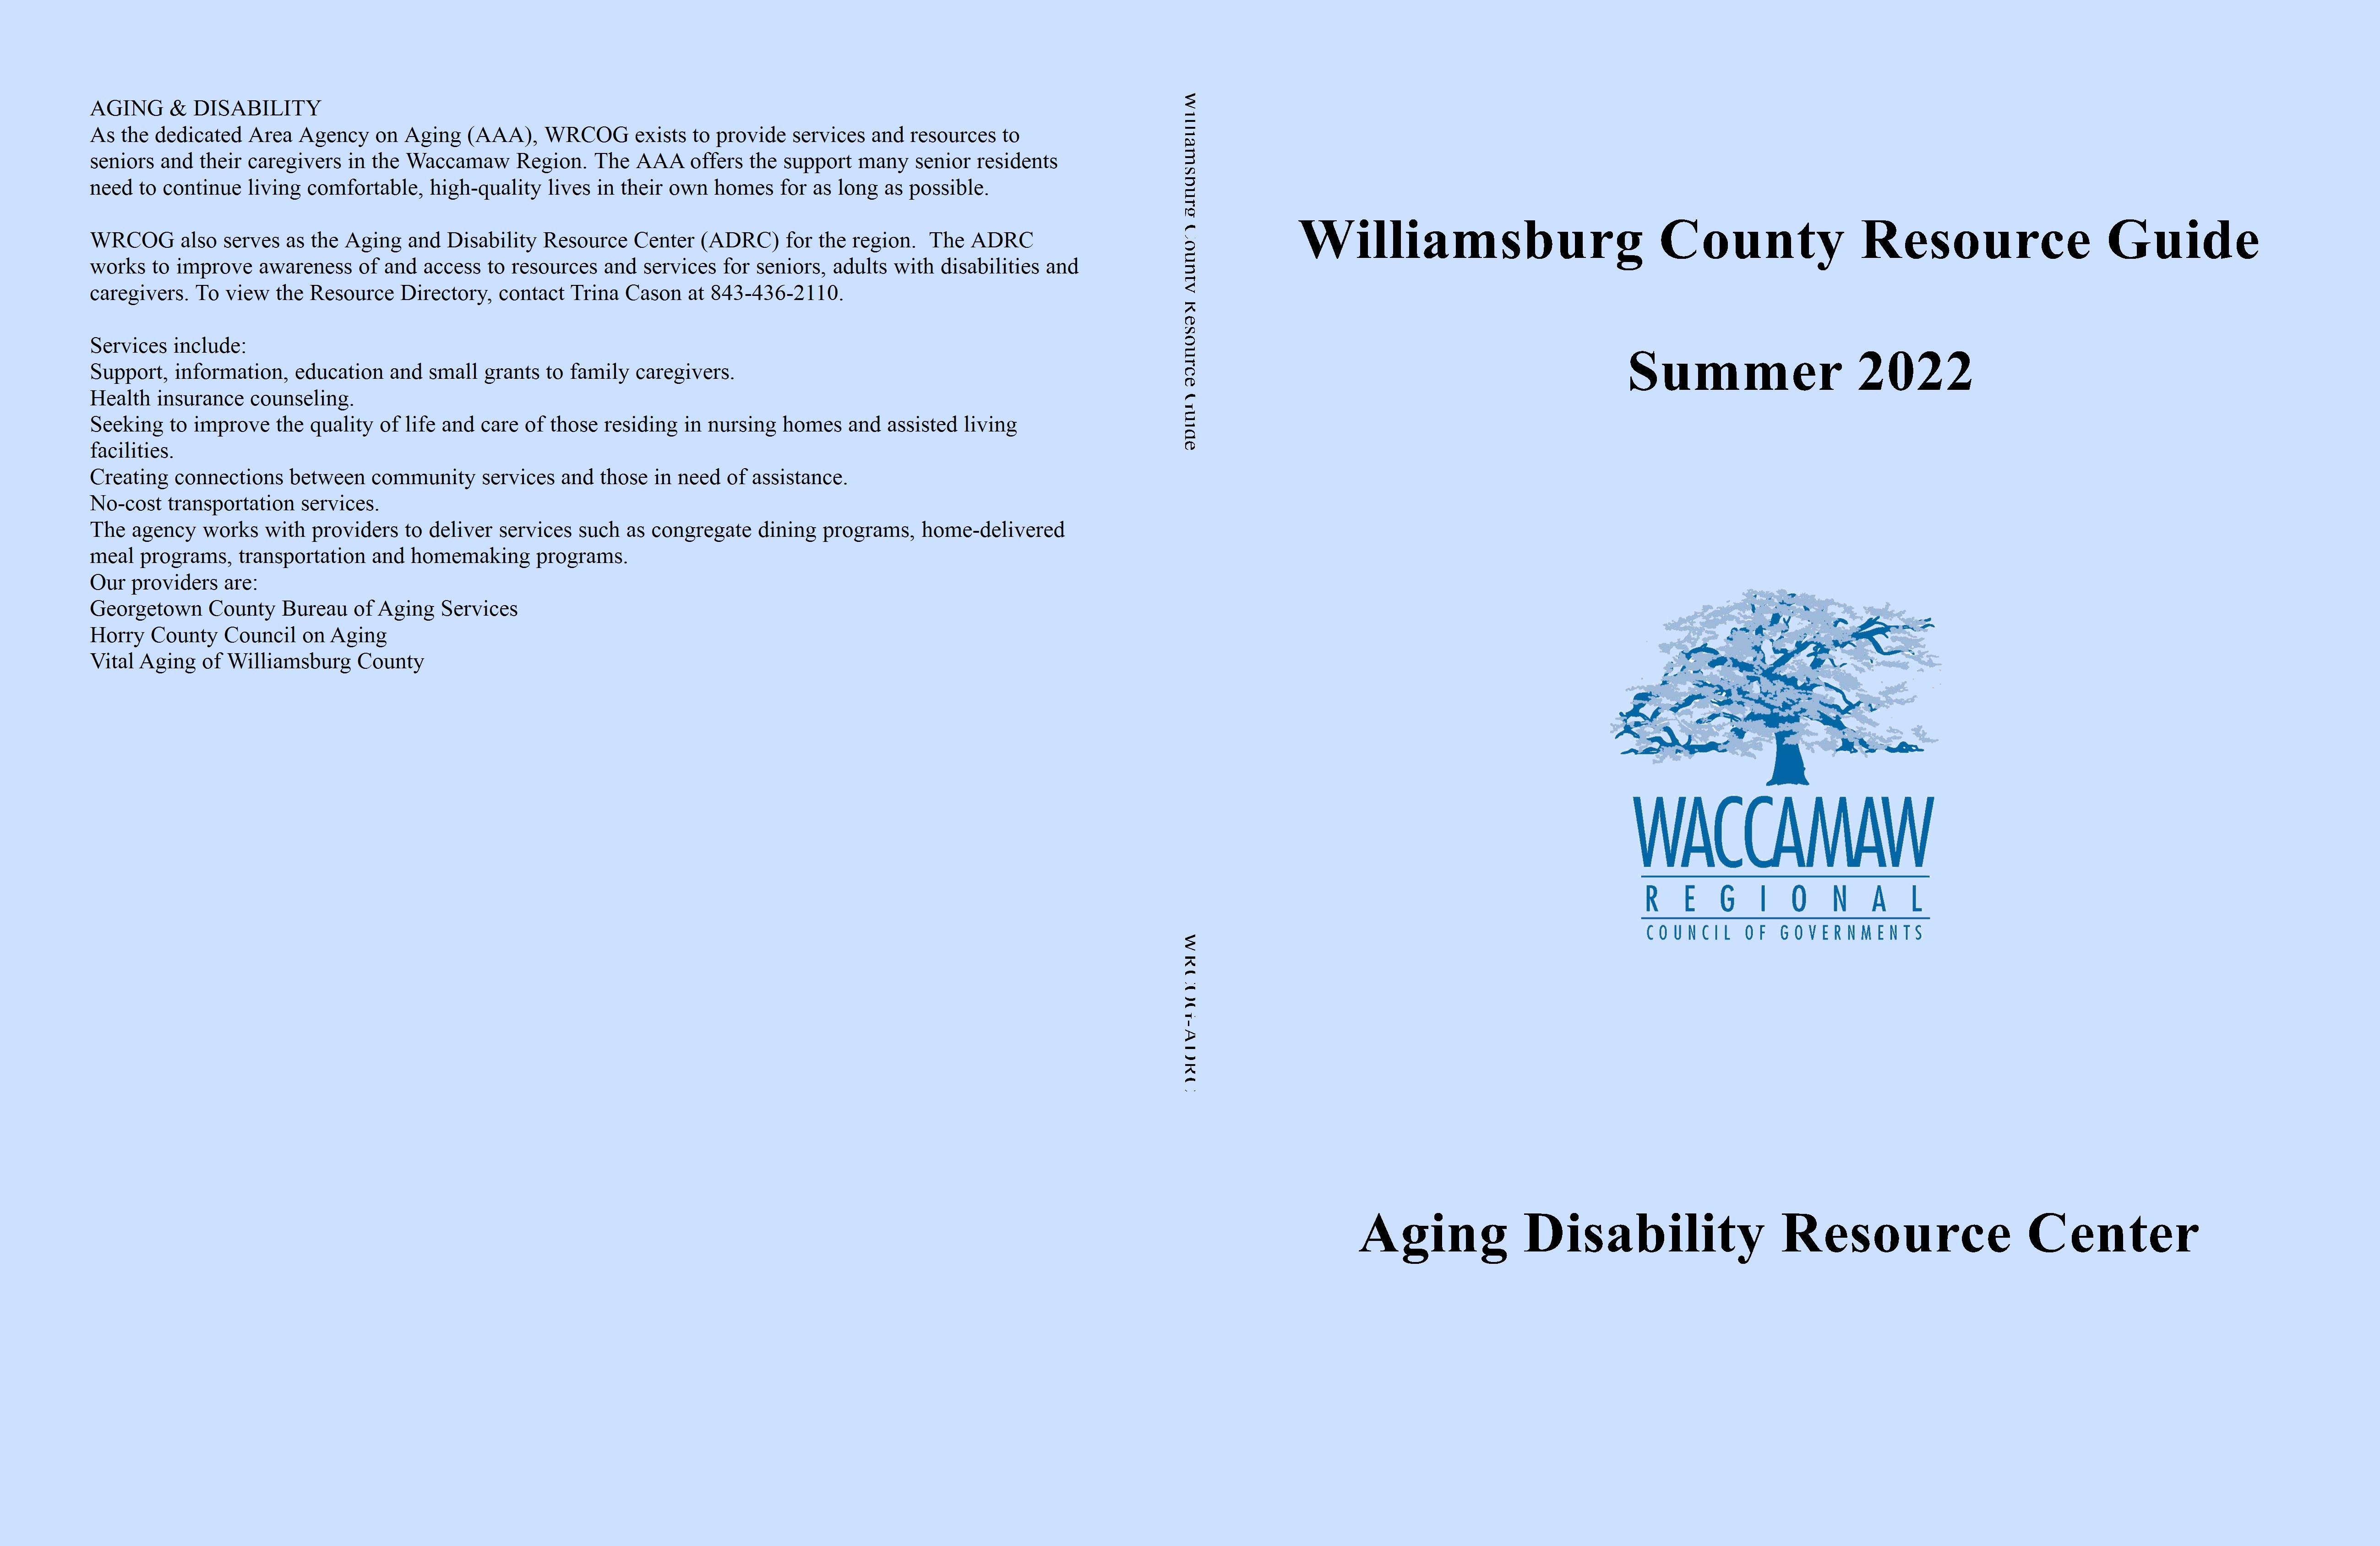 Williamsburg County Resource Guide cover image